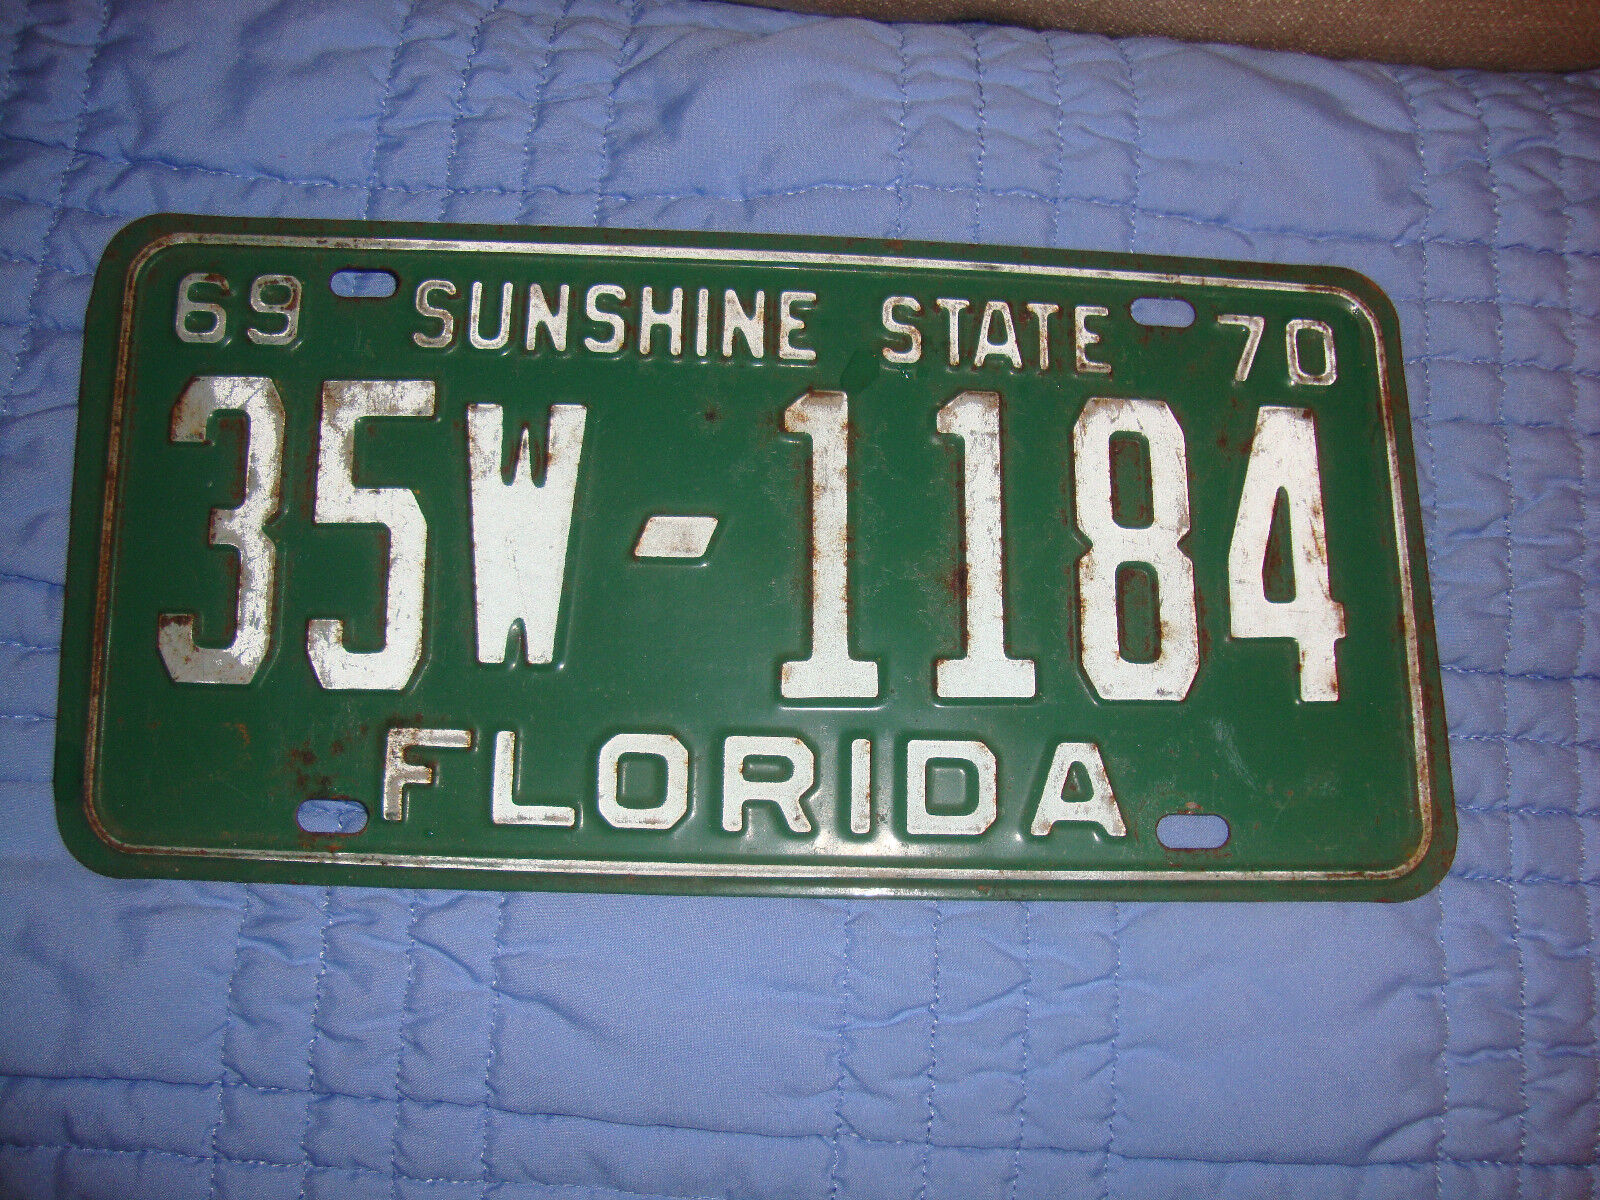  FLORIDA FL LICENSE PLATE 1969 69 1970 70 Collectable Antique 35W-1184